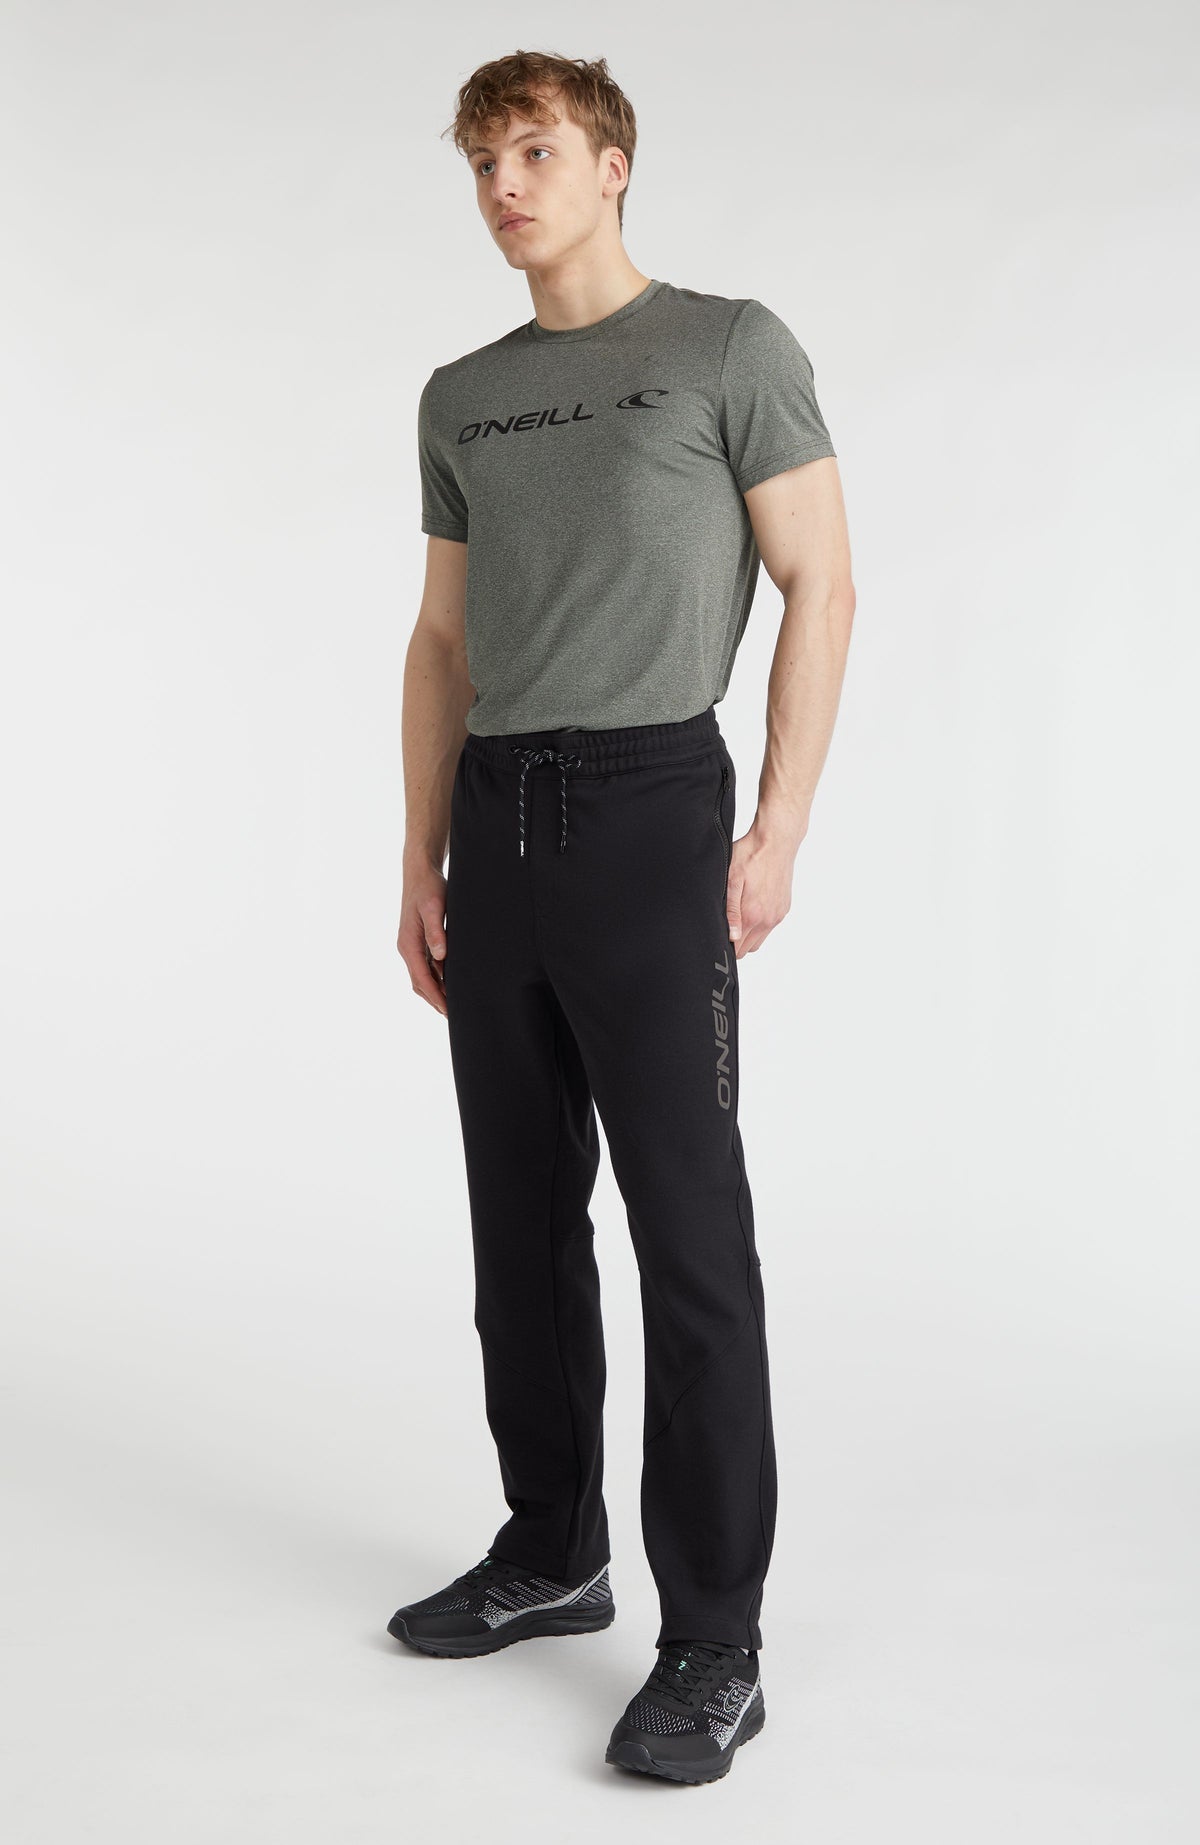 O'Neill Surf State Jogger Pants - Surf State sweatpants